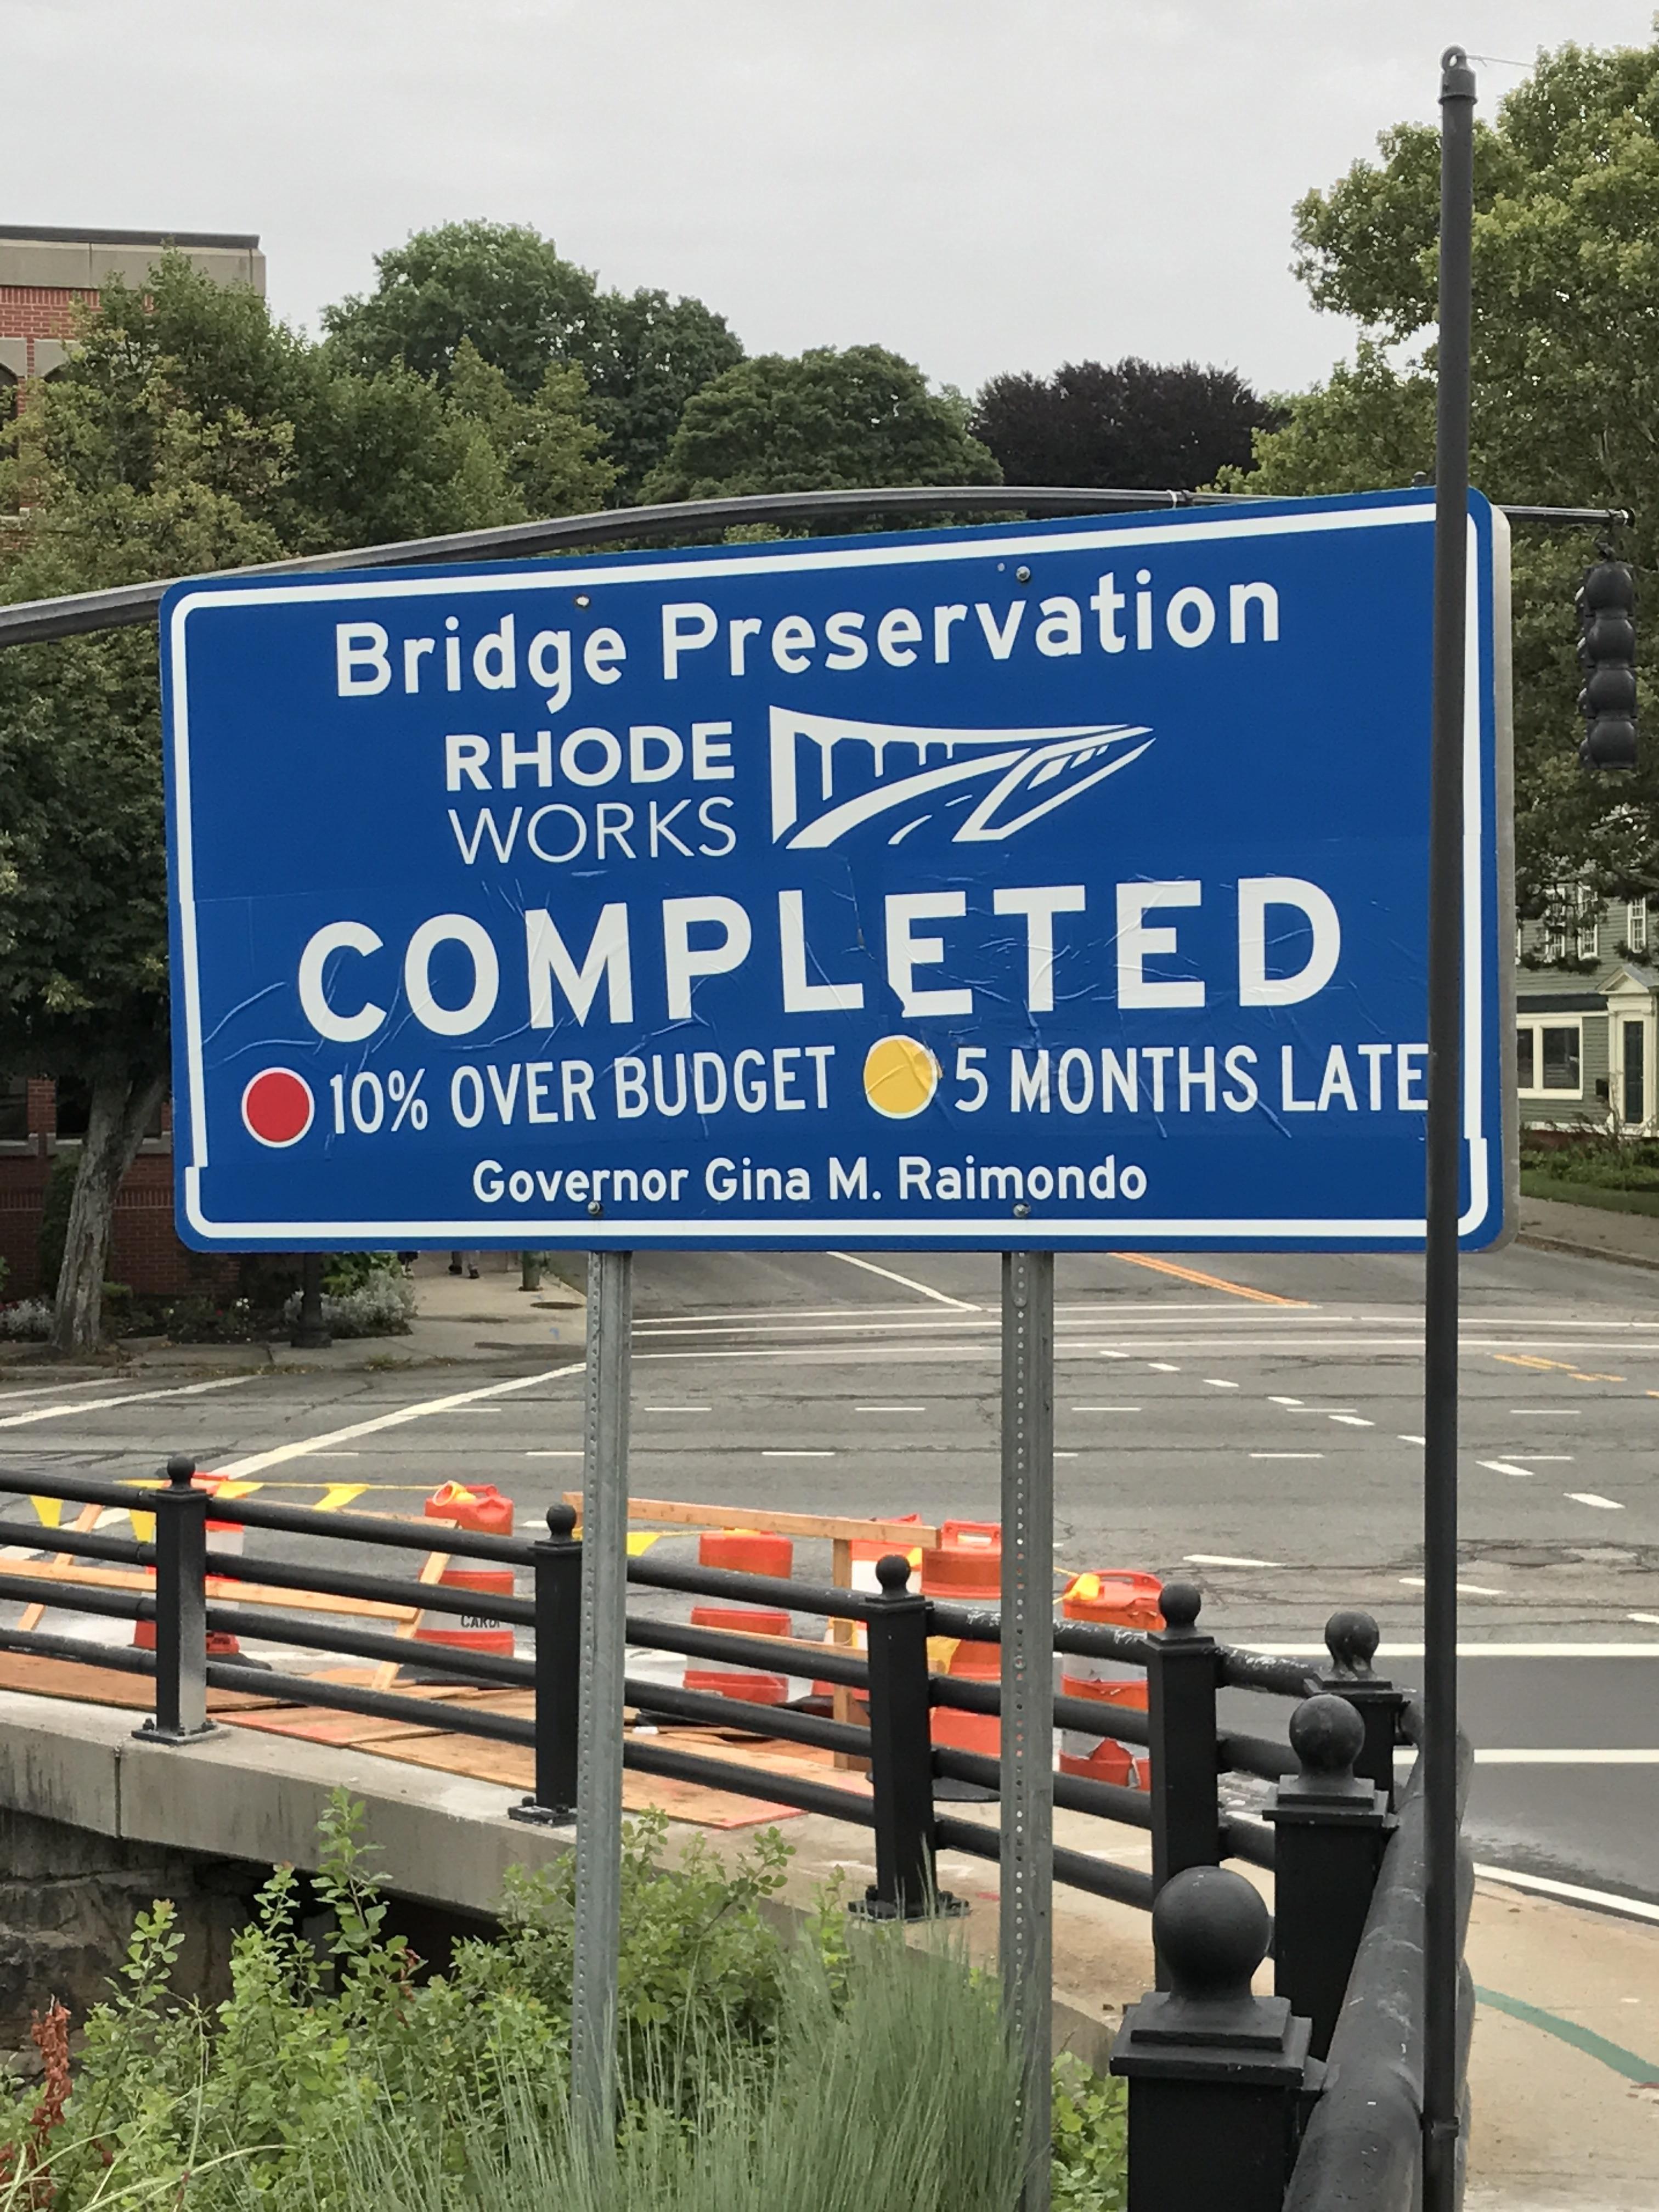 over budget sign on bridge - Bridge Preservation Rhode Works Completed 10% Over Budget 5 Months Late Governor Gina M. Raimondo